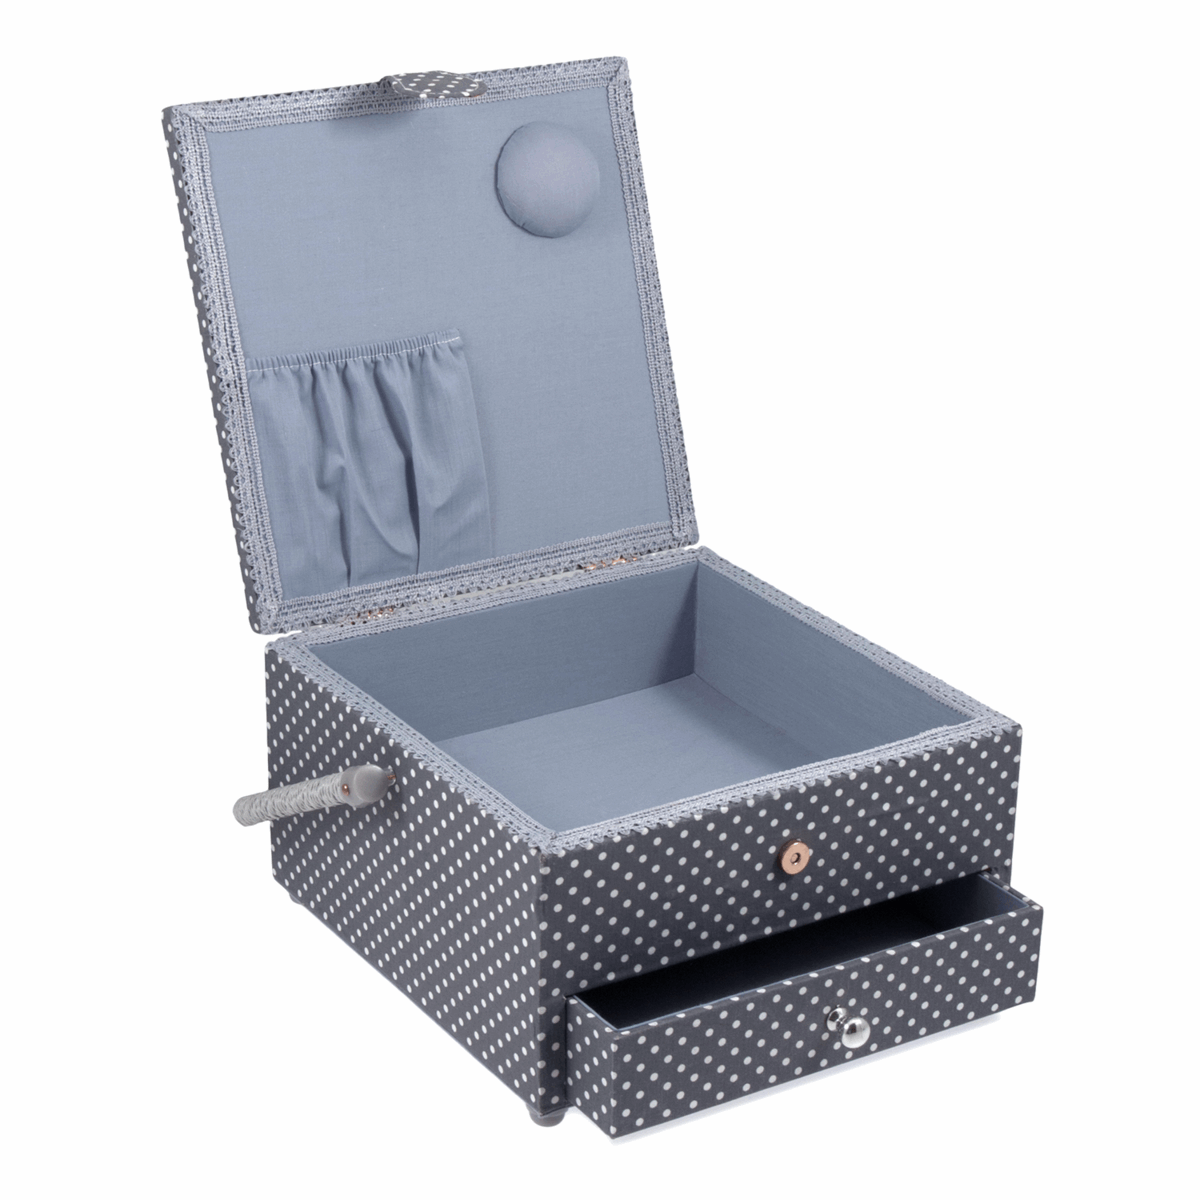 Mini Grey Spot Sewing Box with Drawer - Large